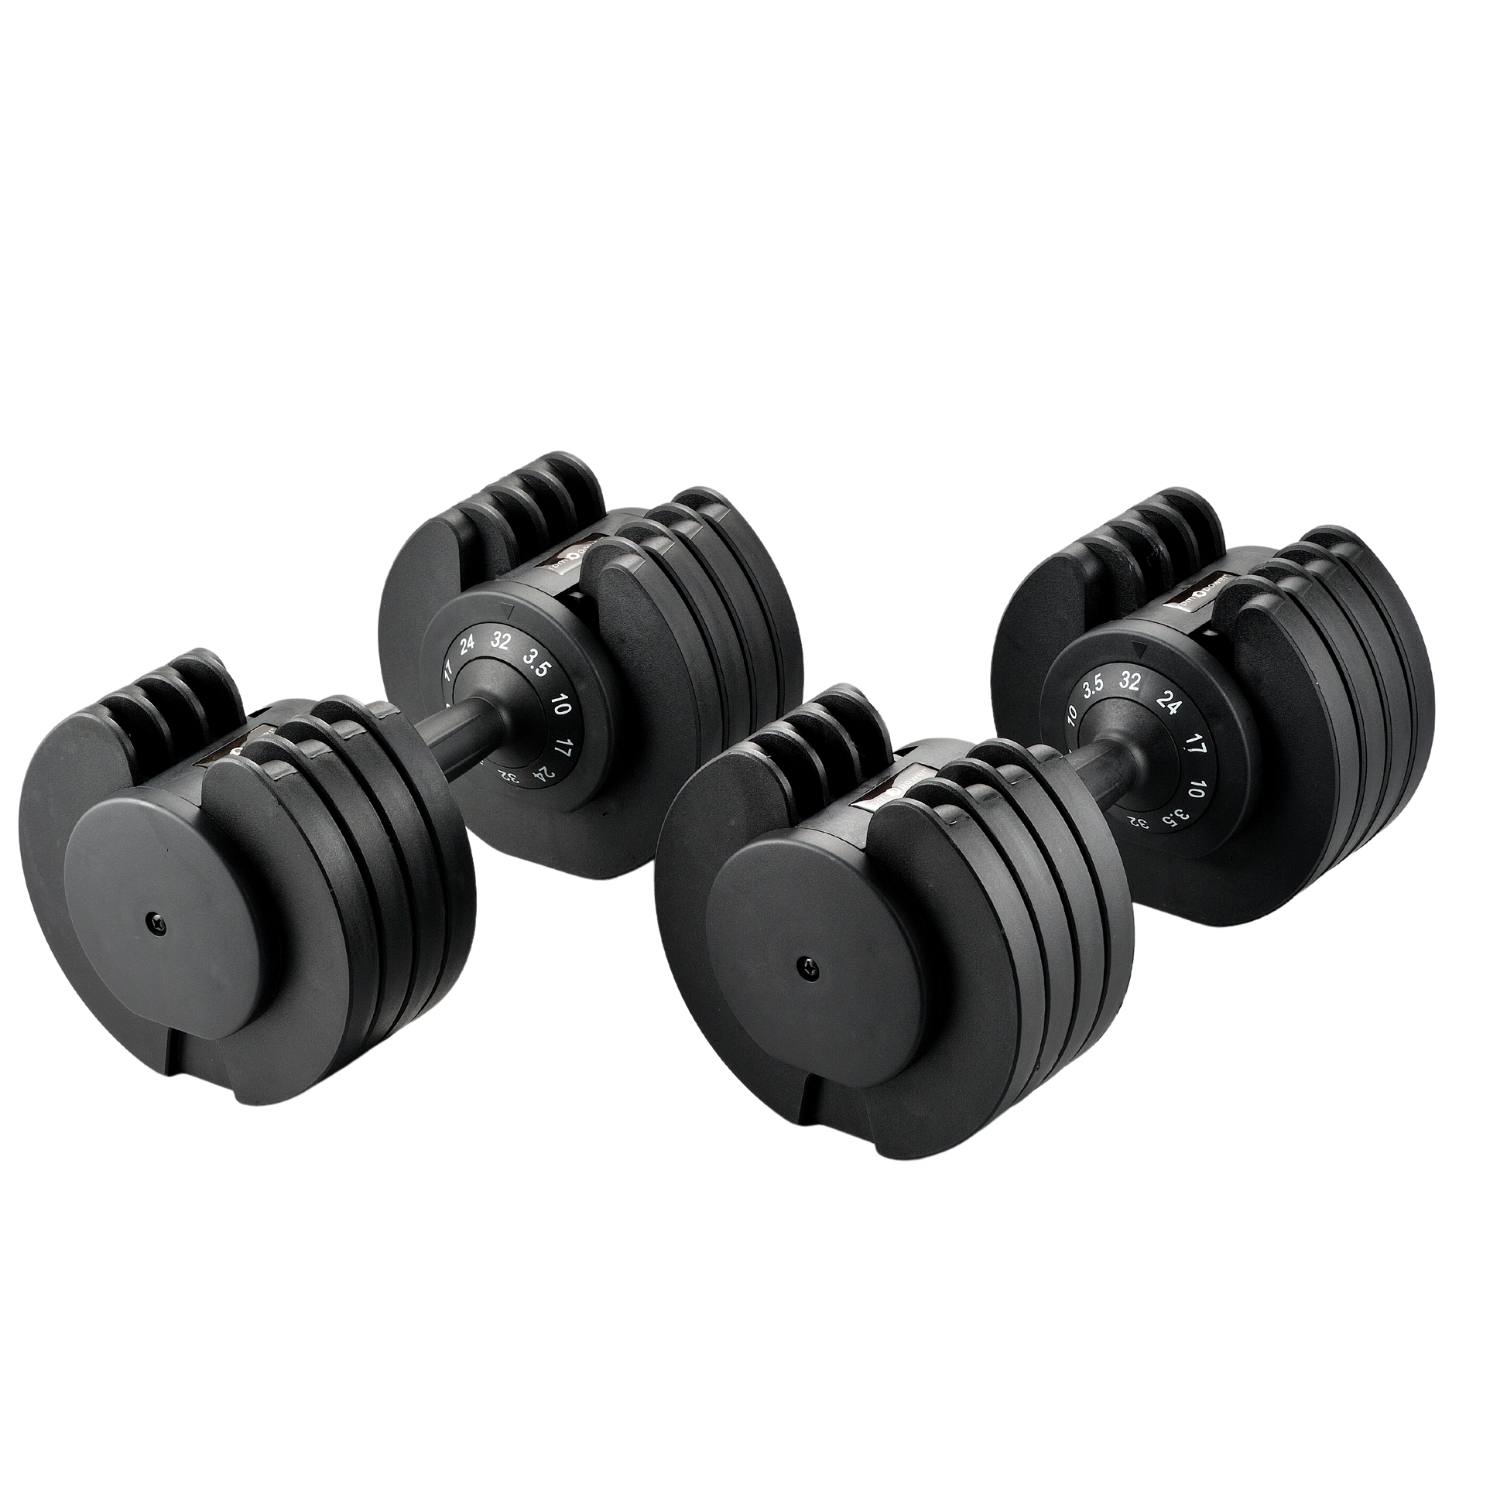 Fit 2023 with adjustable Rockpull 32Kg dumbbells (one dumbbell) and train  whenever you want, gym at home, adjustable weight, gym & fitness, exercise  at home, dumbbell for training - AliExpress